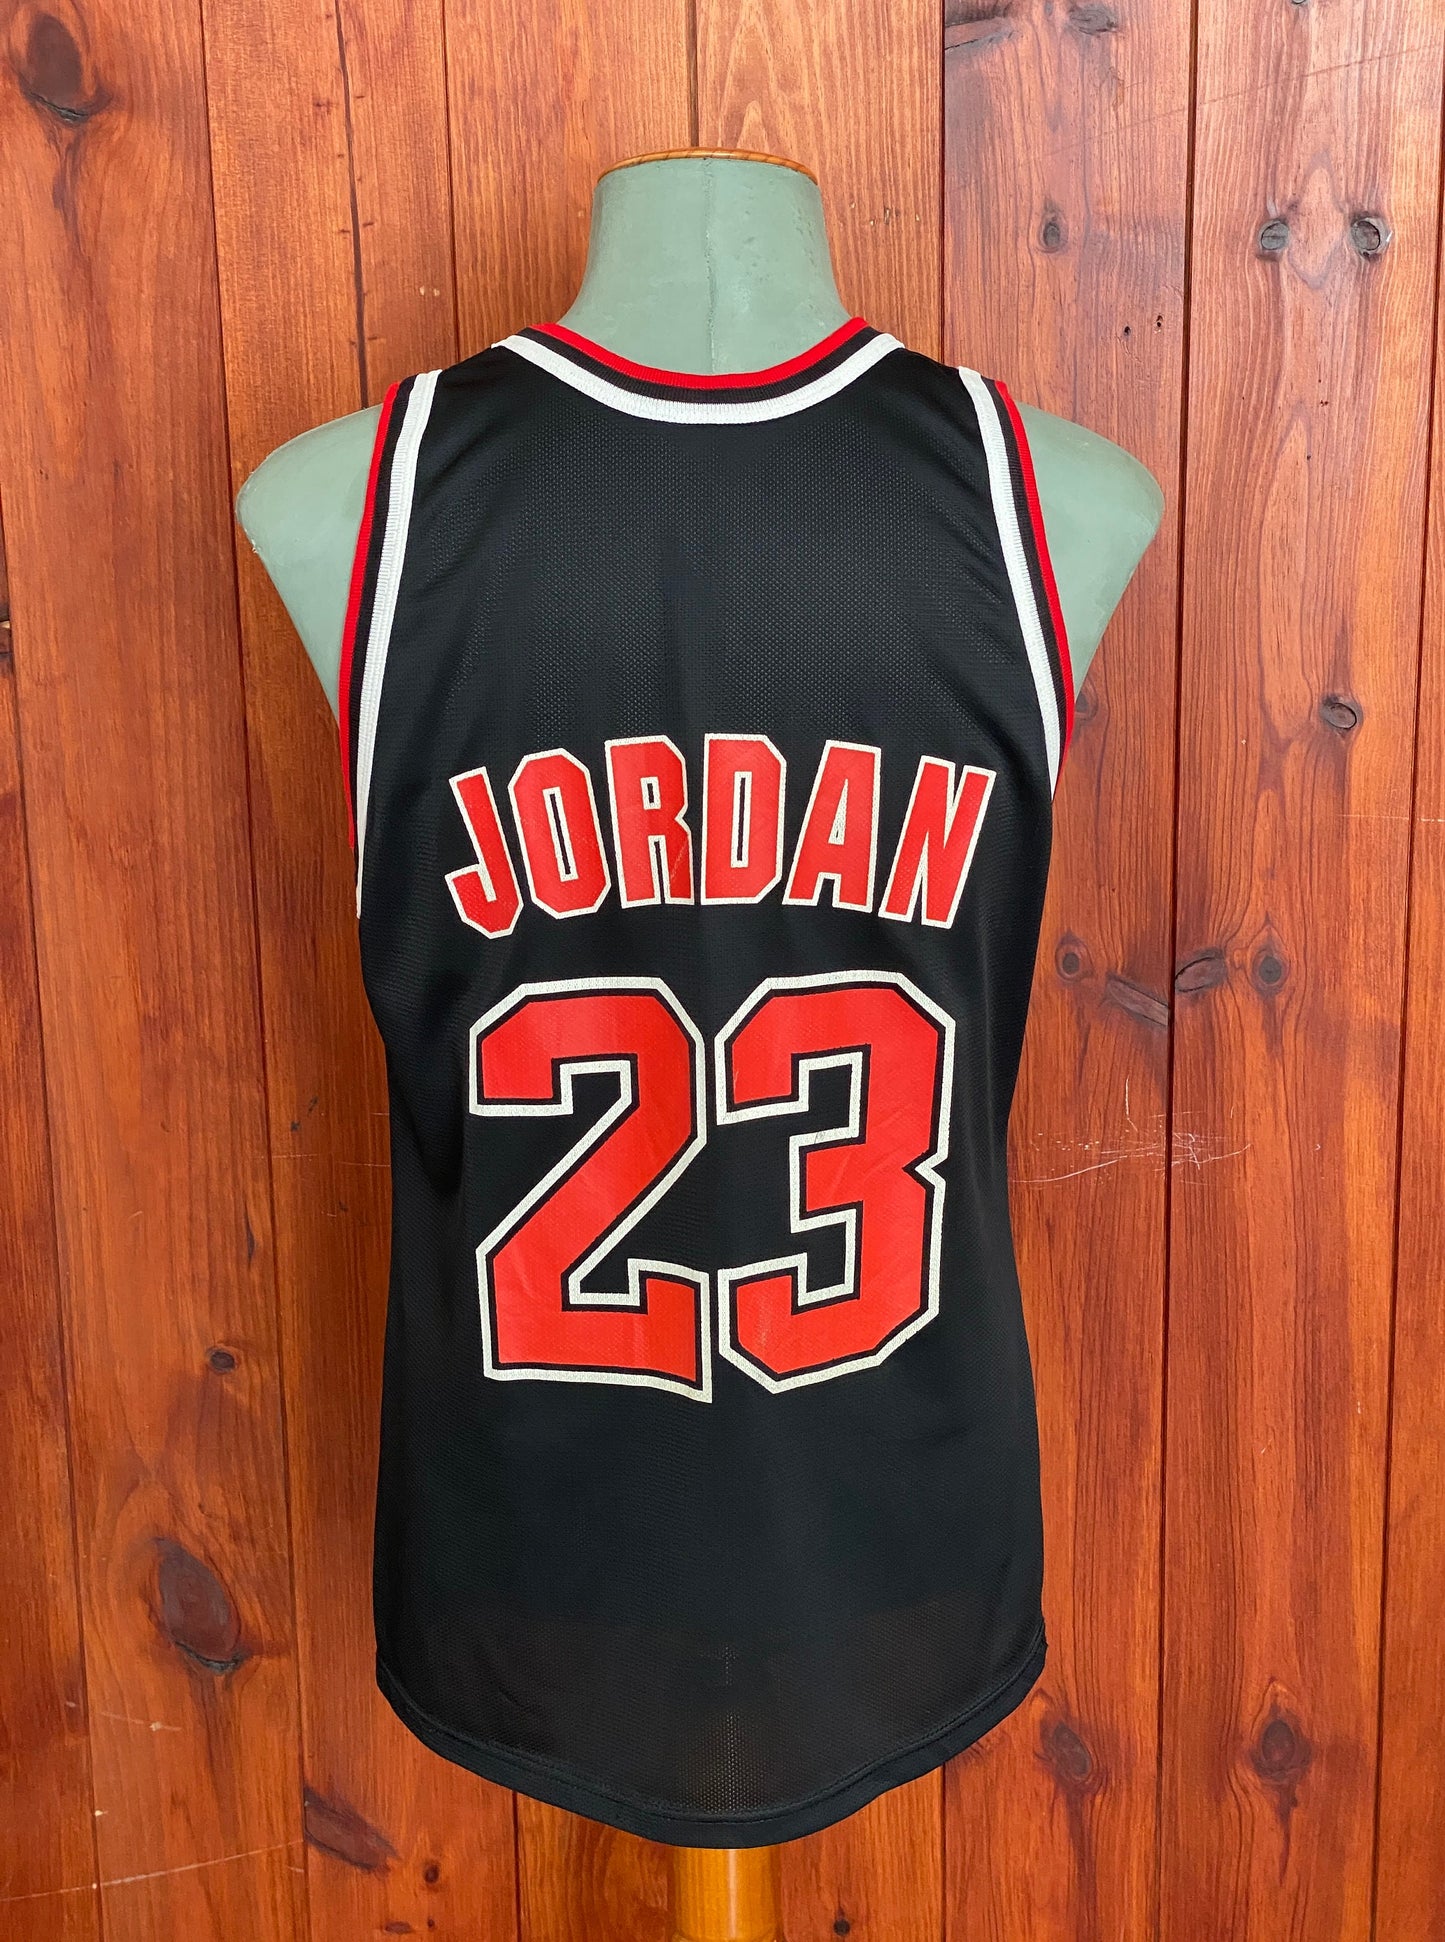 Vintage 90s NBA Chicago Bulls Michael Jordan #23 jersey, size 44 - back view. Made in USA by Champion.